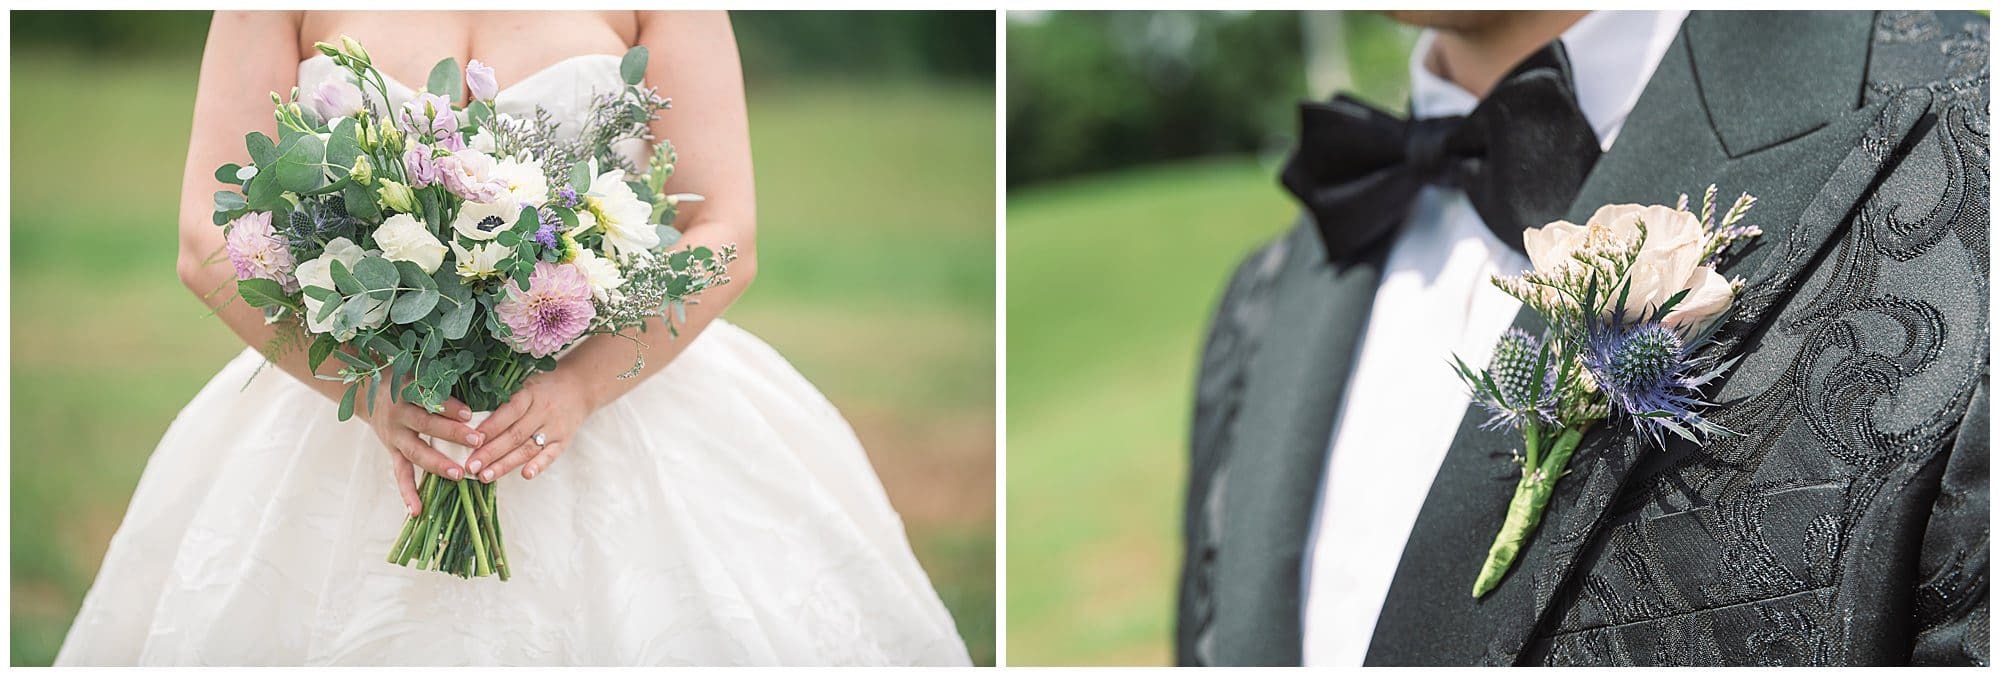 Close up photos of Bride's bouquet and groom's boutonierre